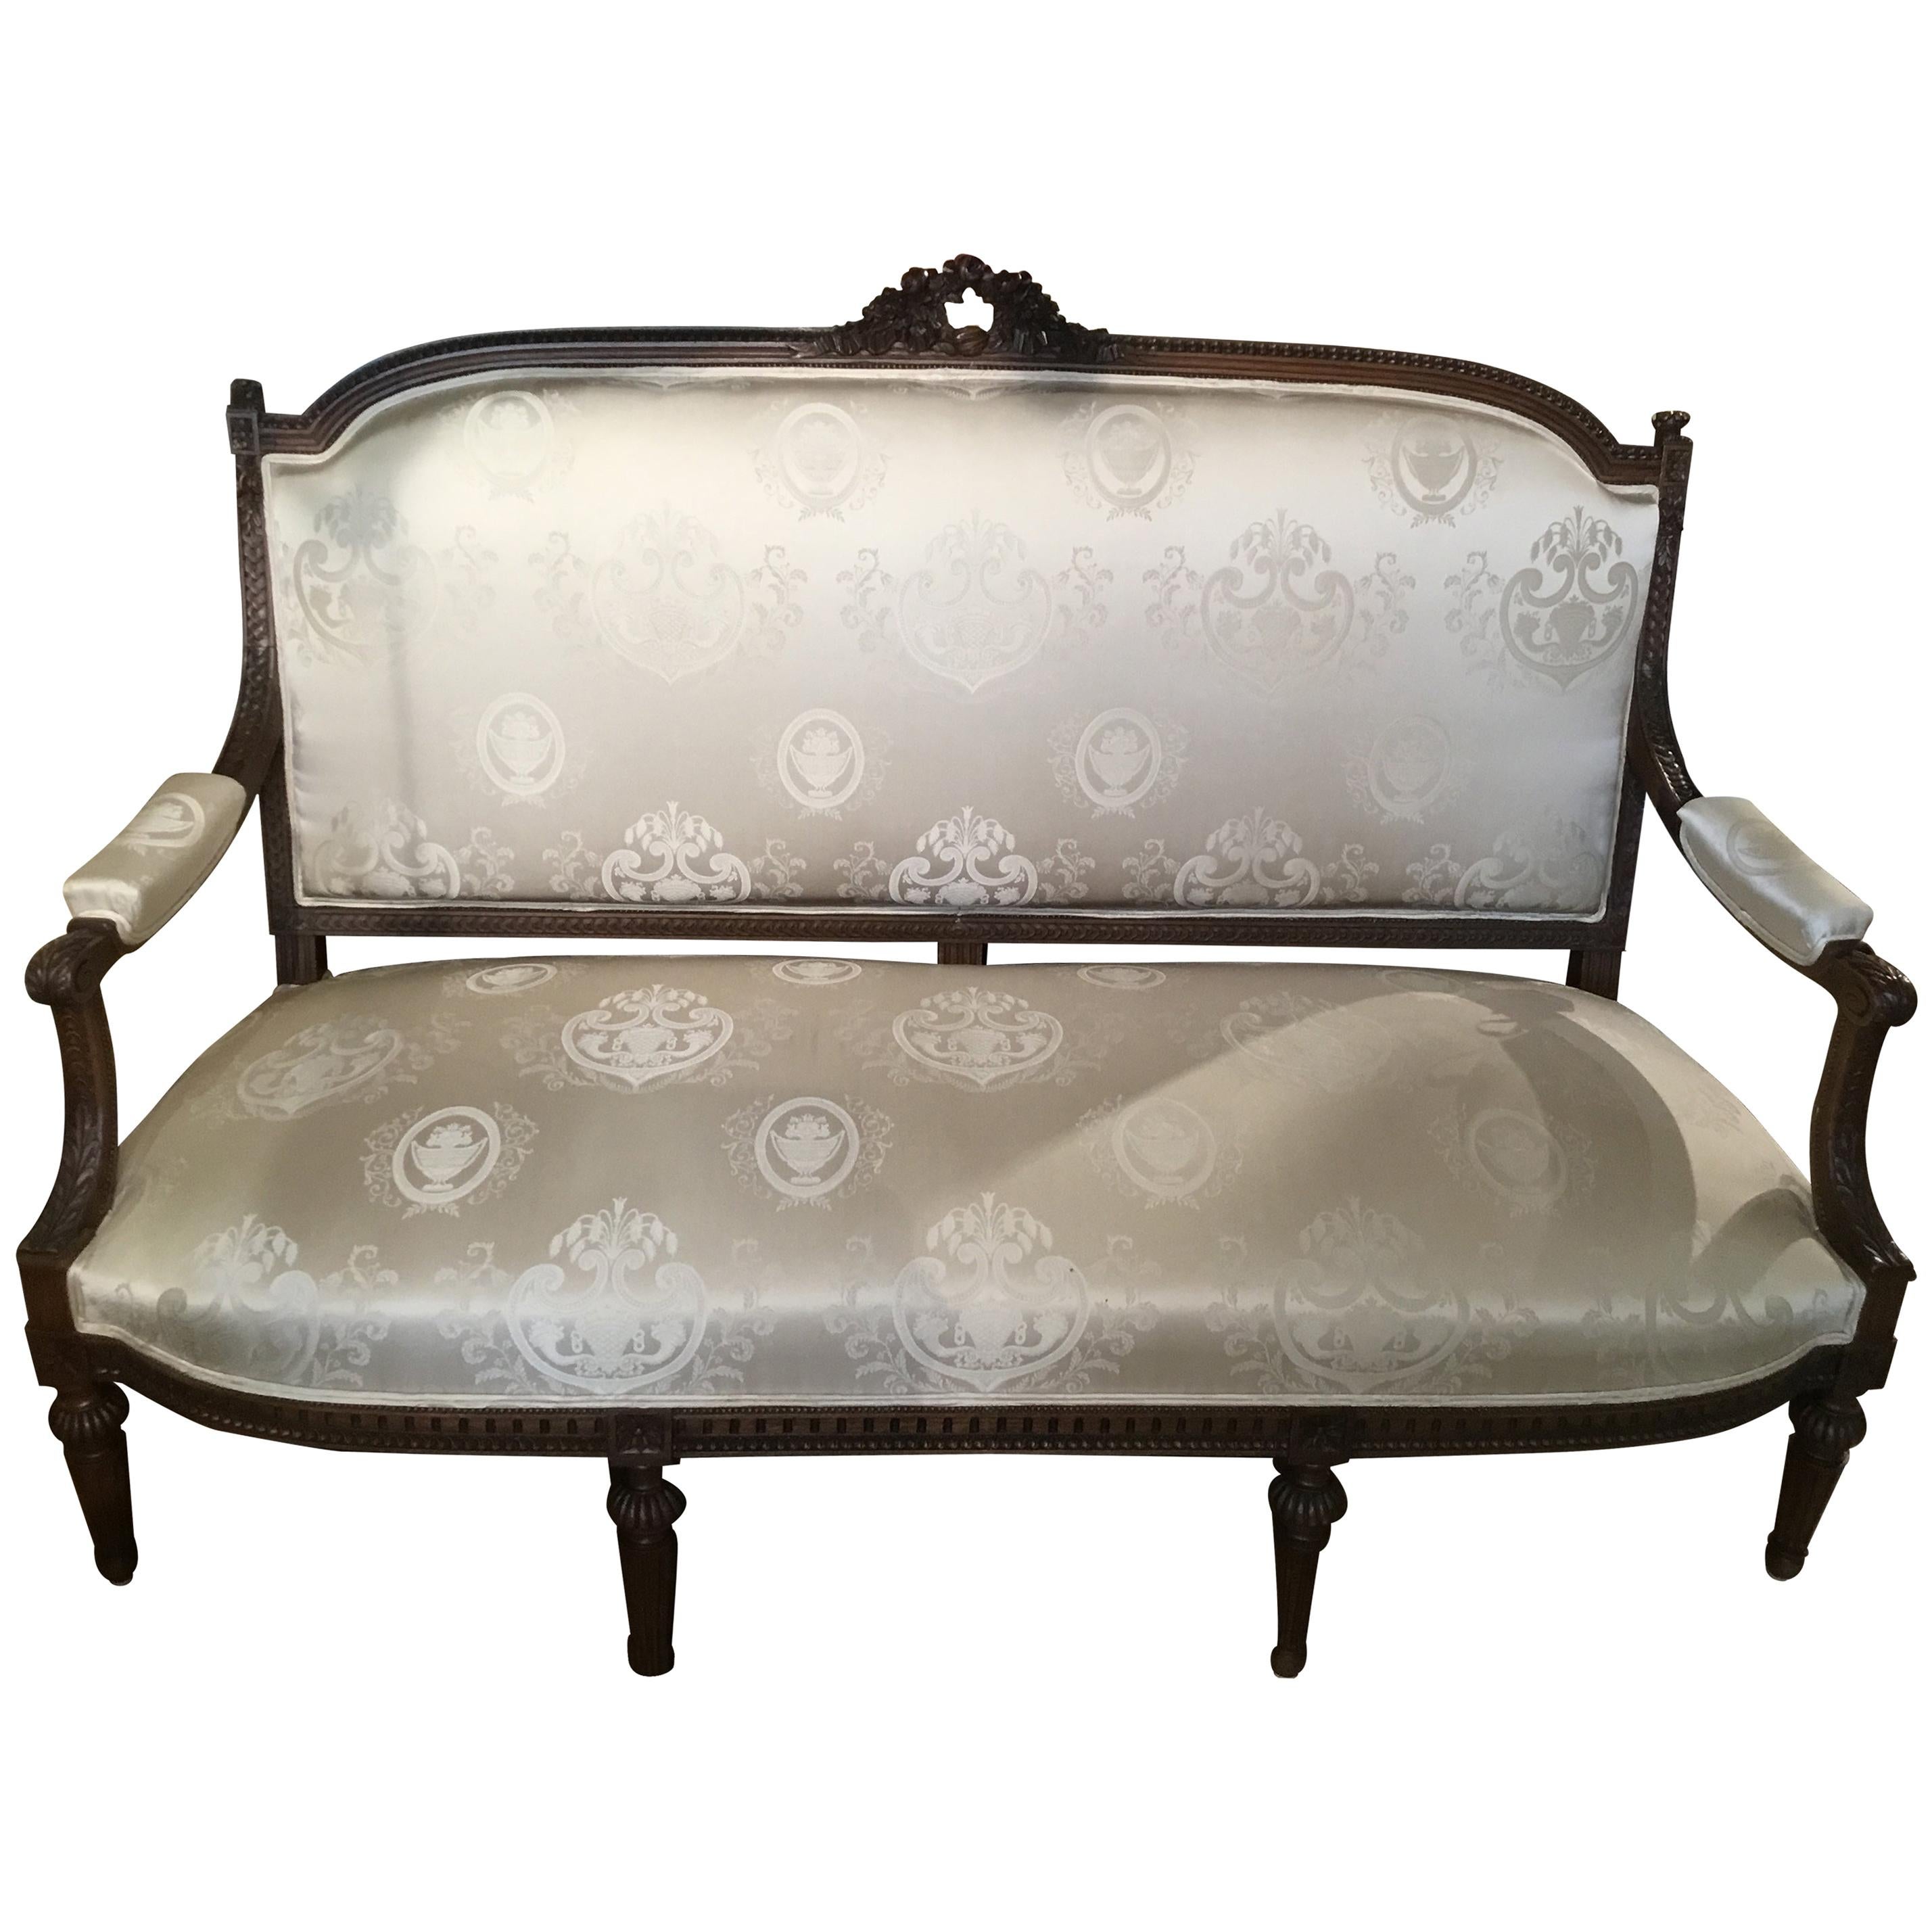 Louis XVI Style Settee, 19th Century Walnut with New Upholstery